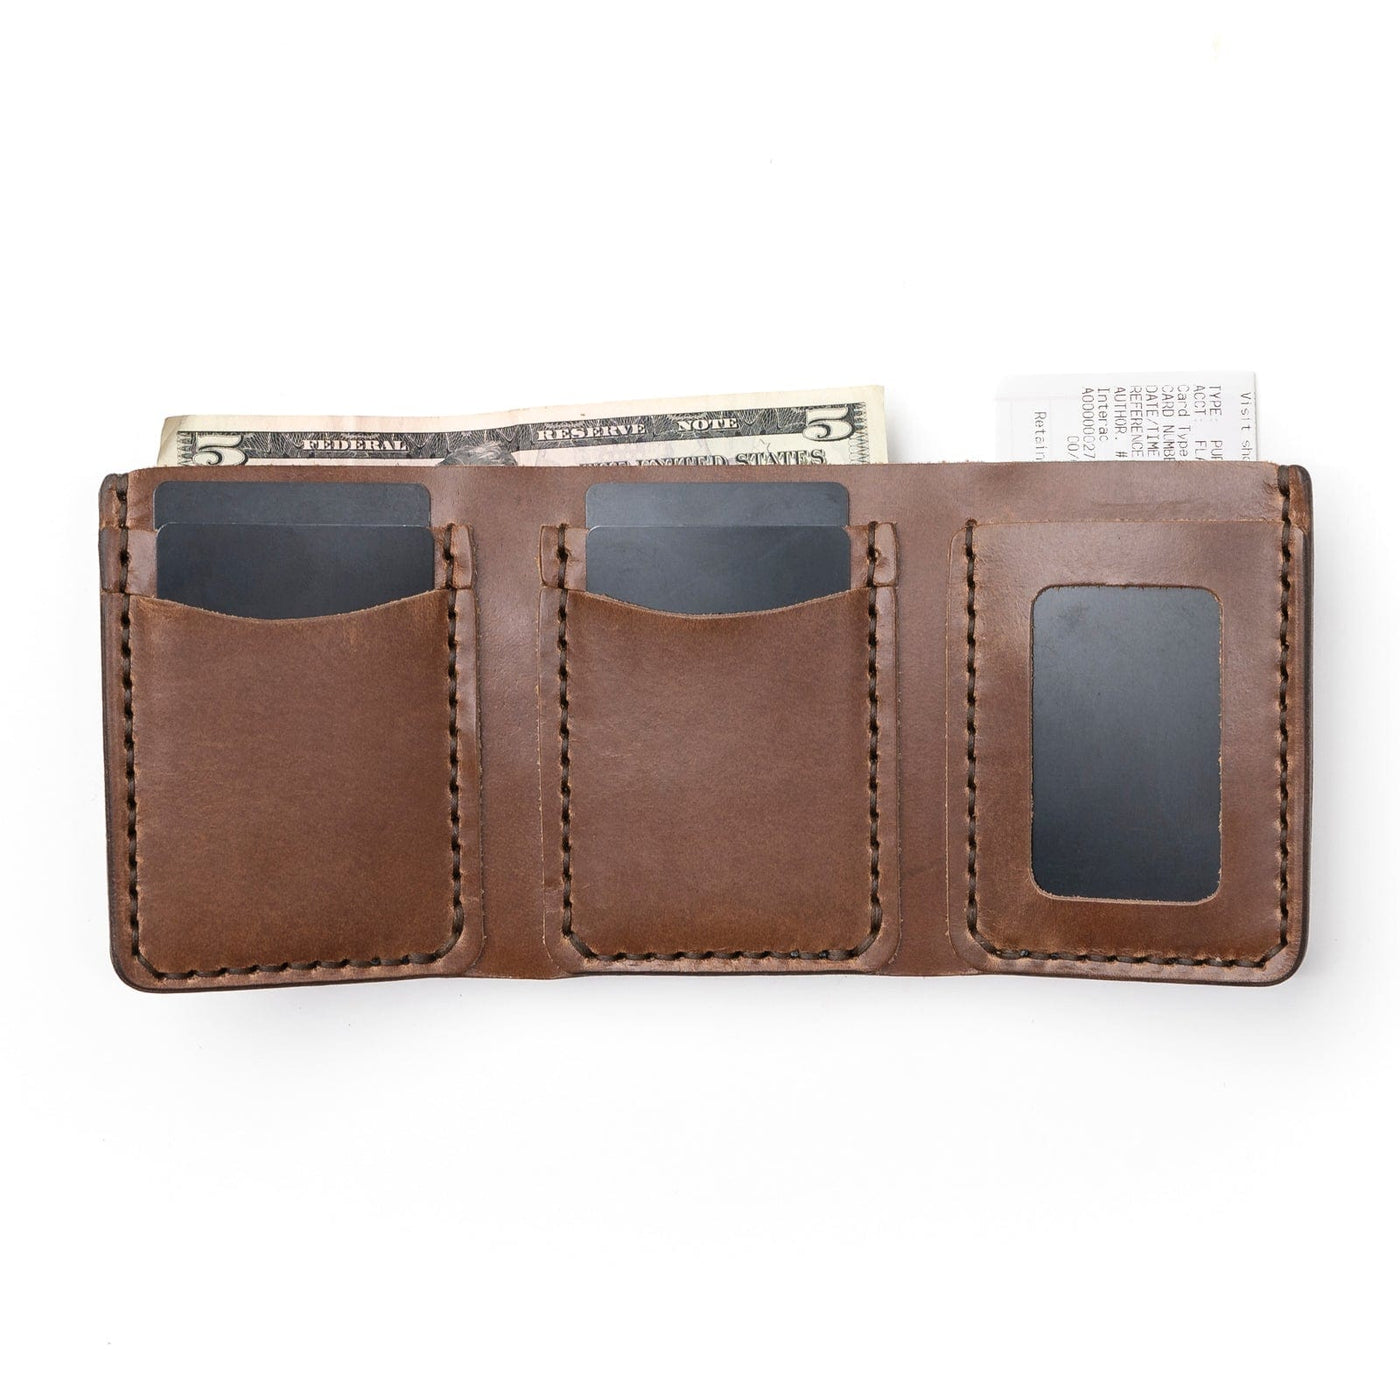 Leather Trifold Wallet - Natural Popov Leather